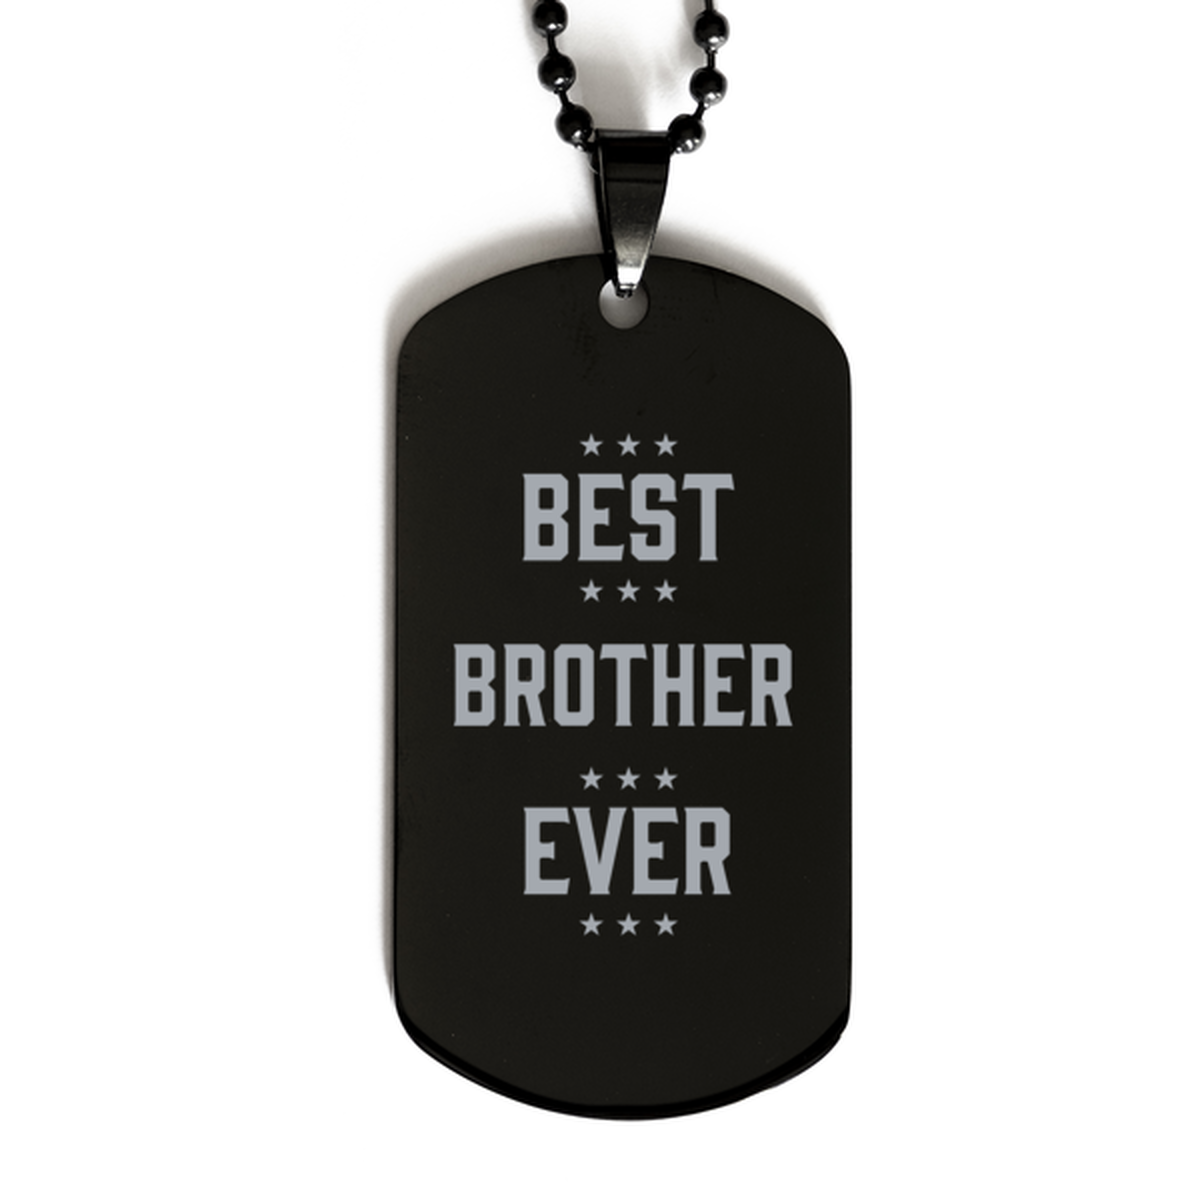 Best Brother Ever Brother Gifts, Funny Black Dog Tag For Brother, Birthday Family Presents Engraved Necklace For Men